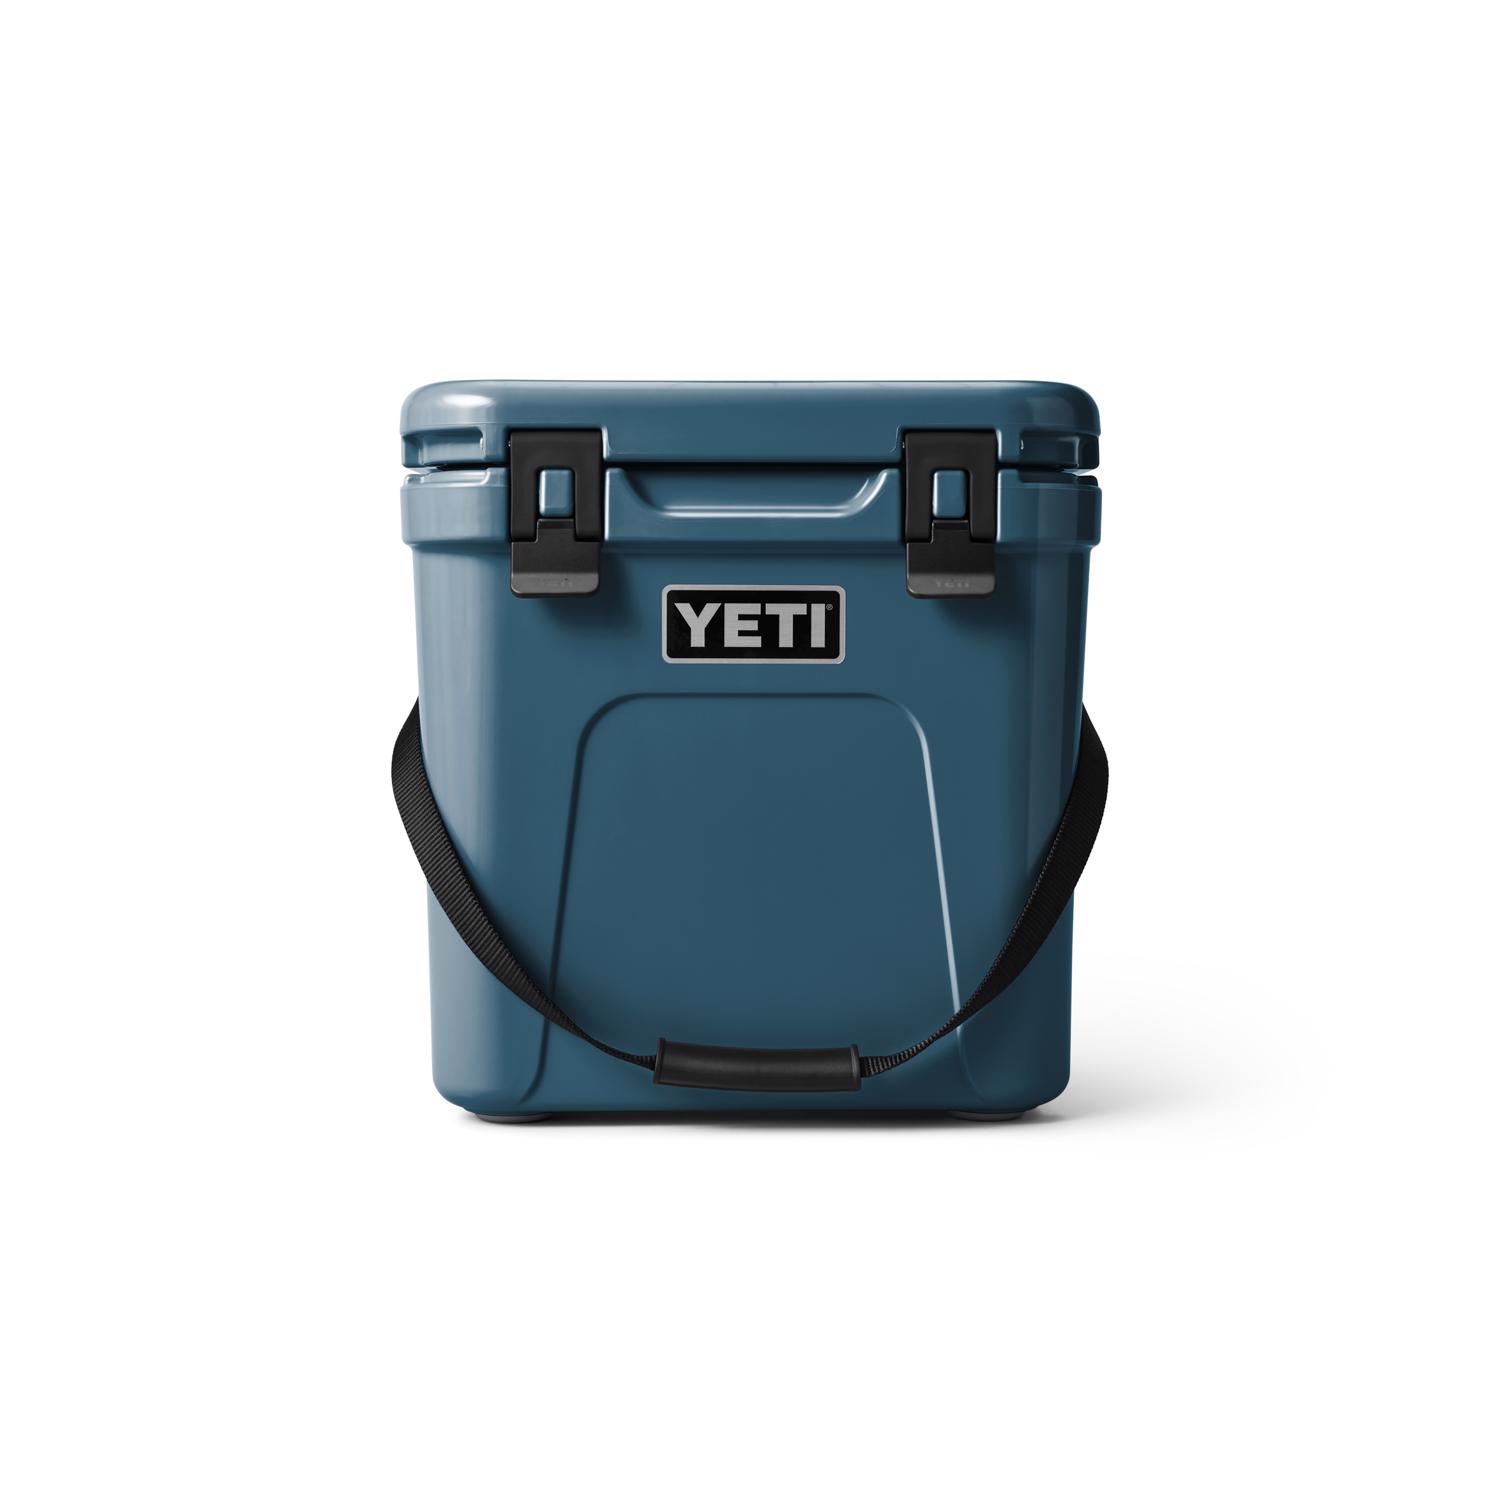 Offshore Blue gang! : r/YetiCoolers